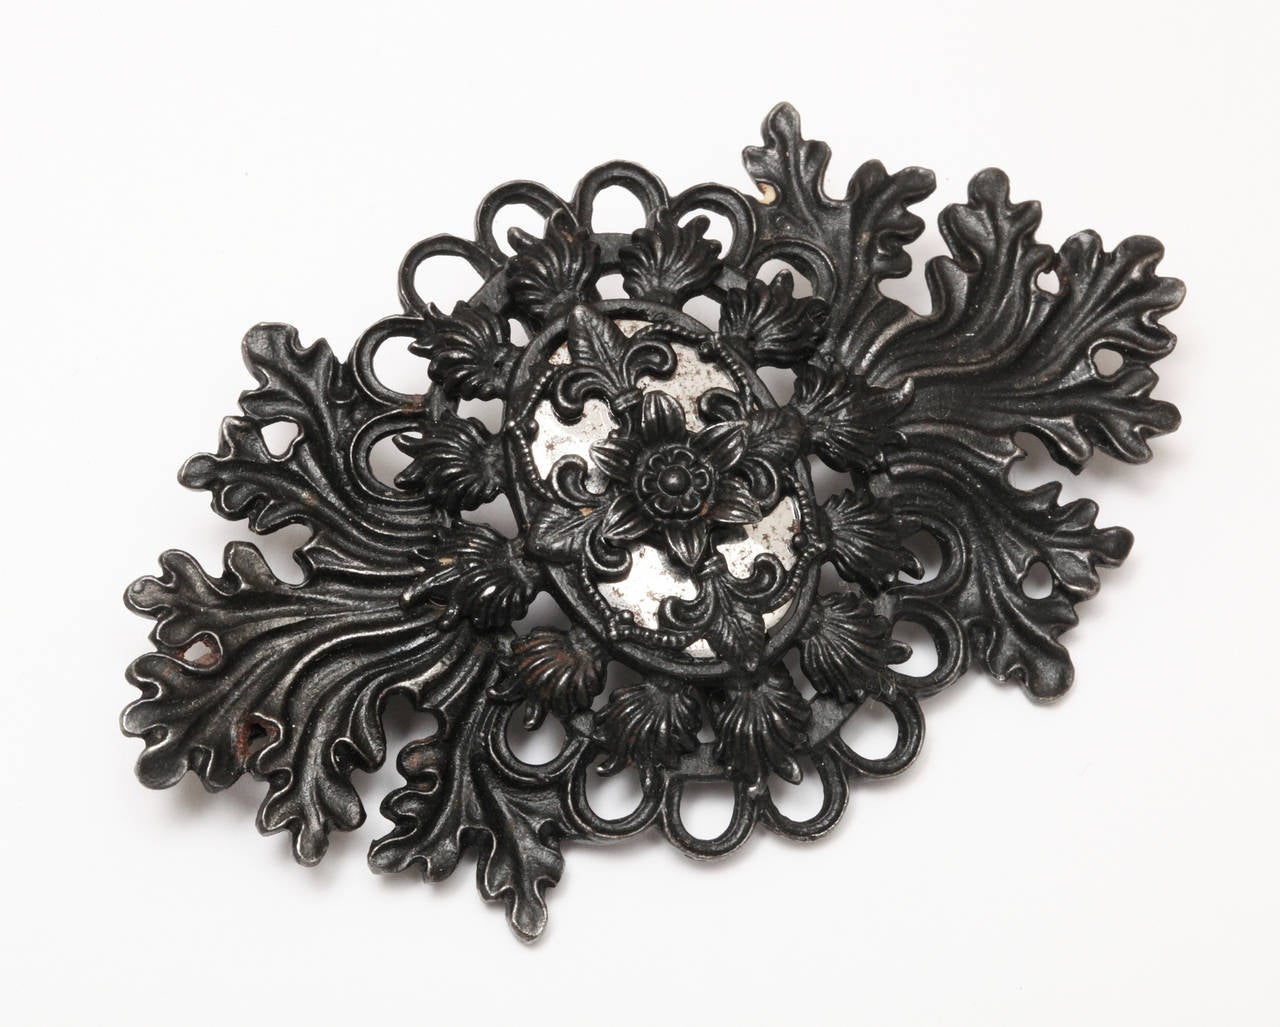 The solid and lacy design of this large Berlin Iron brooch shows the artistic thoughtfulness of the designer to create contrast and interest when placed on the fabric of your clothing. This is the first brooch of Iron we have shown. There are few on